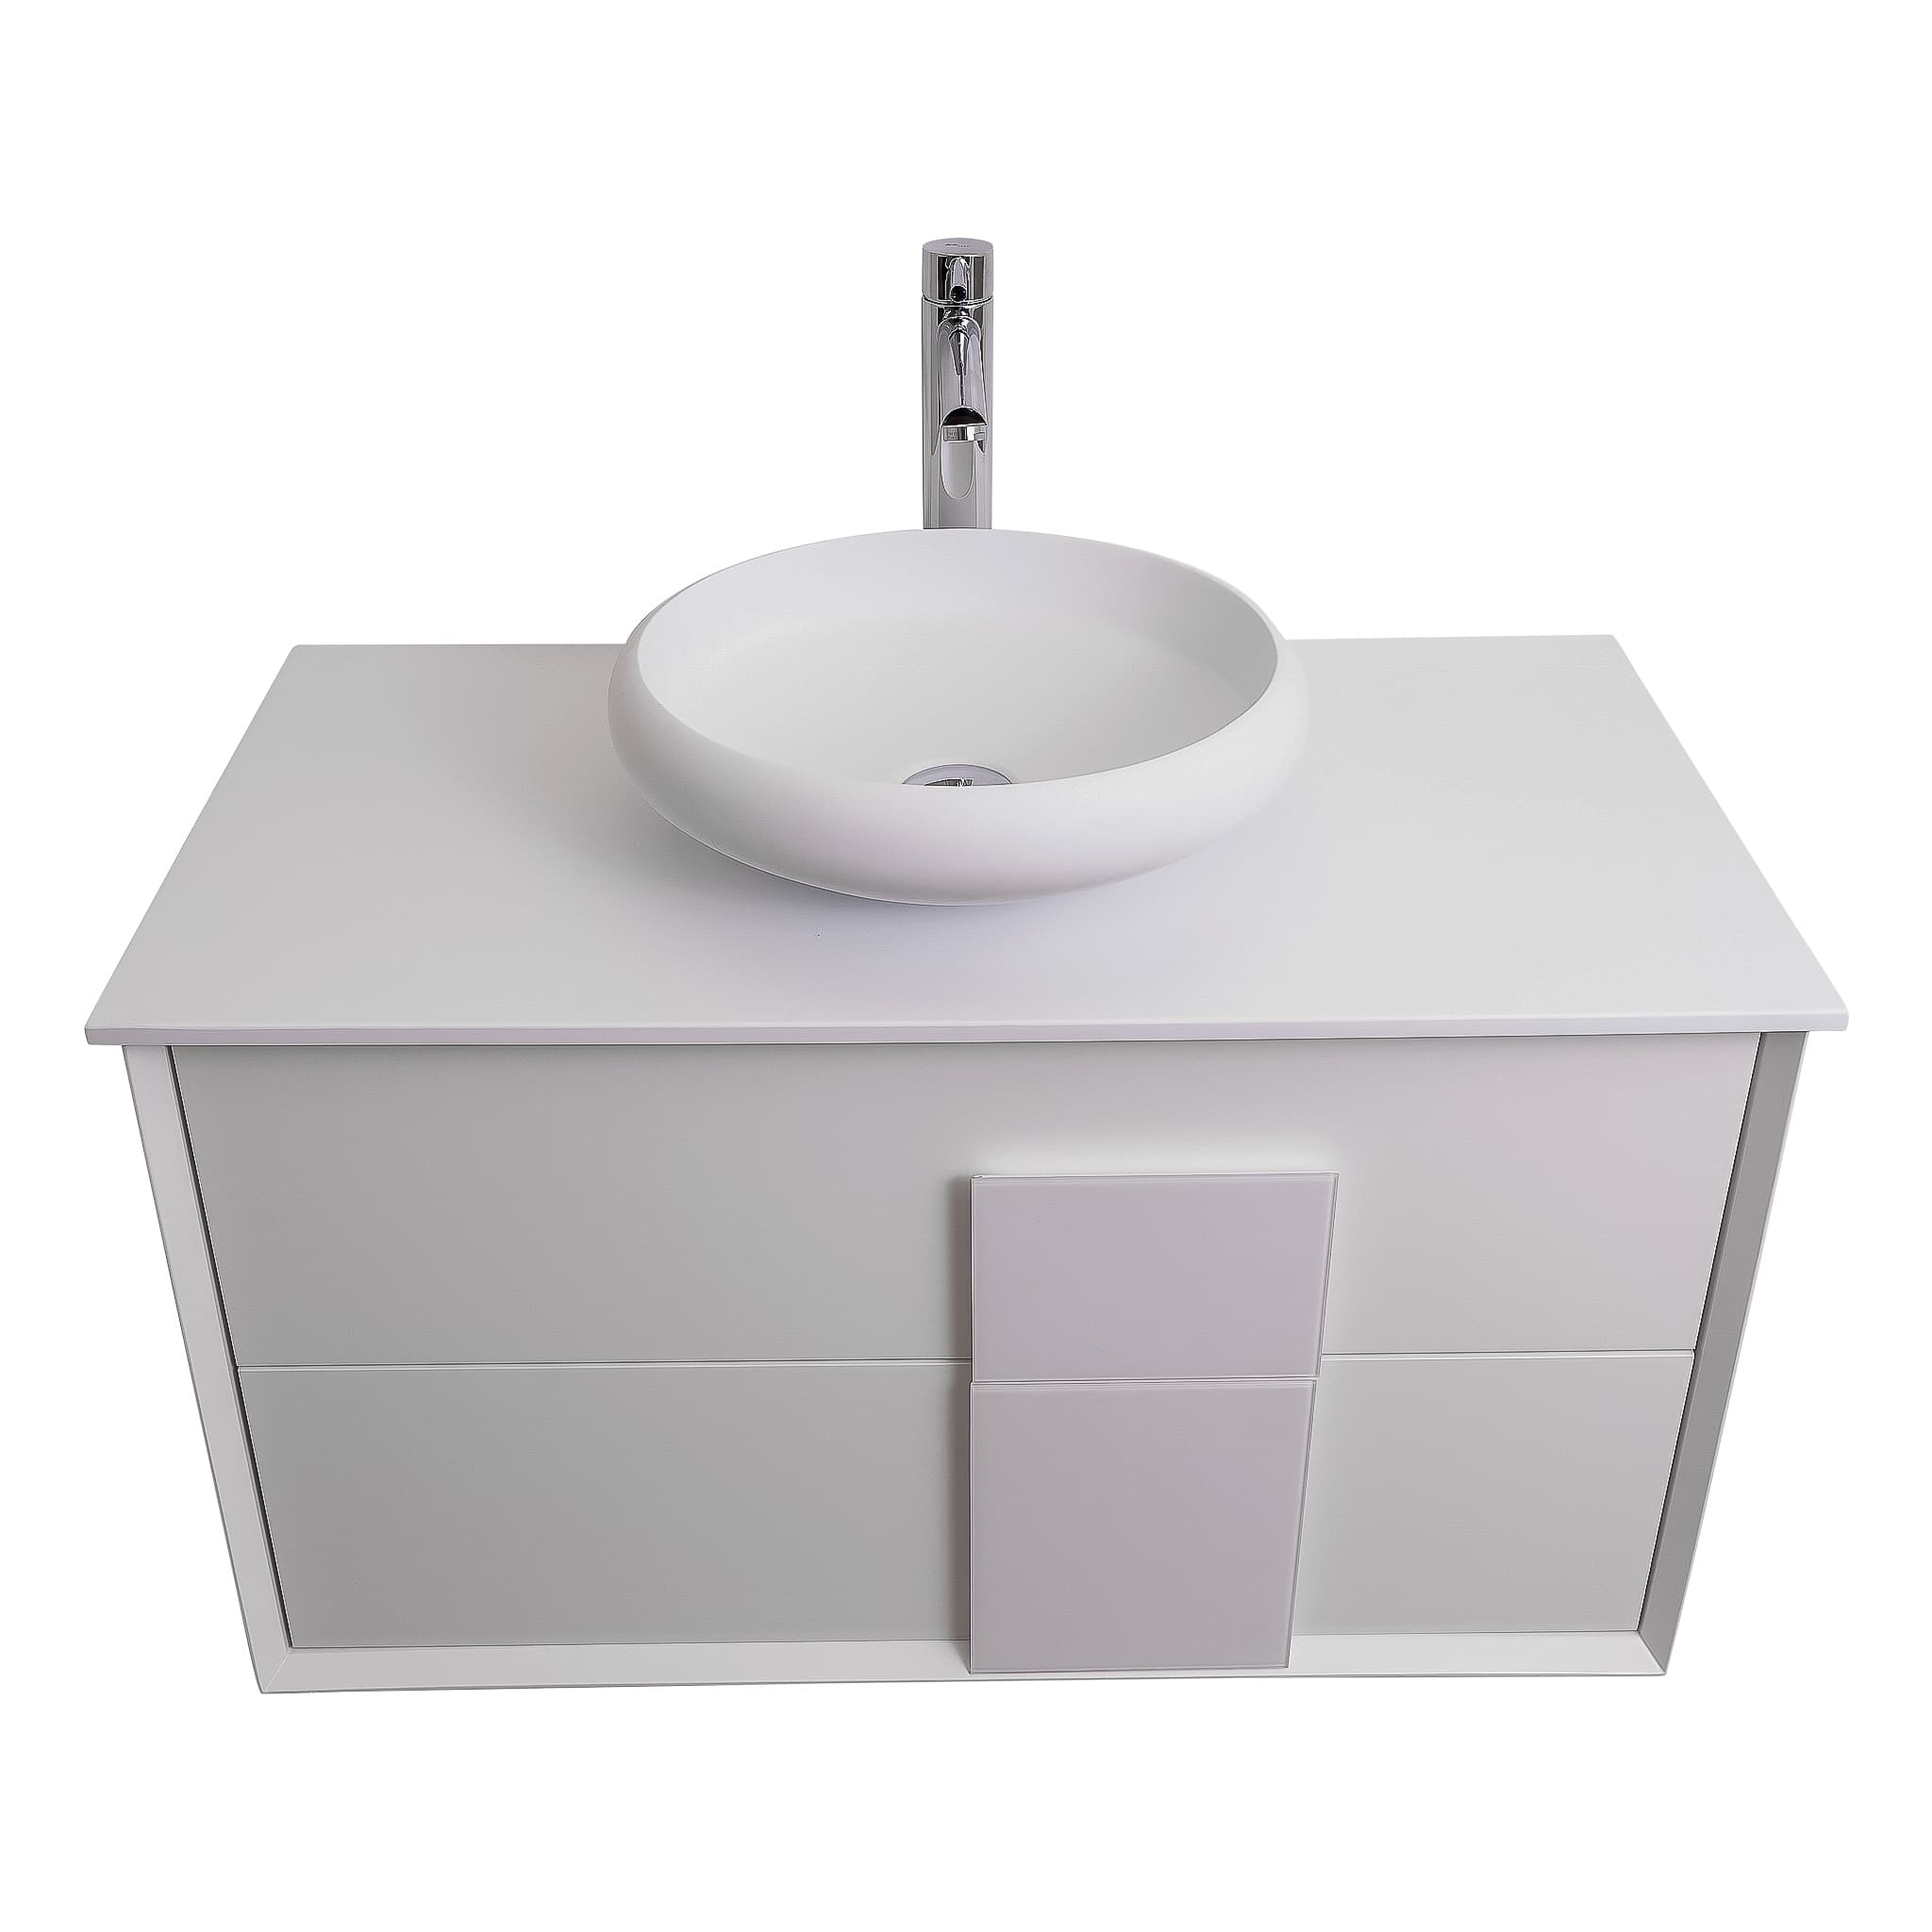 Piazza 31.5 Matte White With White Handle Cabinet, Solid Surface Flat White Counter and Round Solid Surface White Basin 1153, Wall Mounted Modern Vanity Set